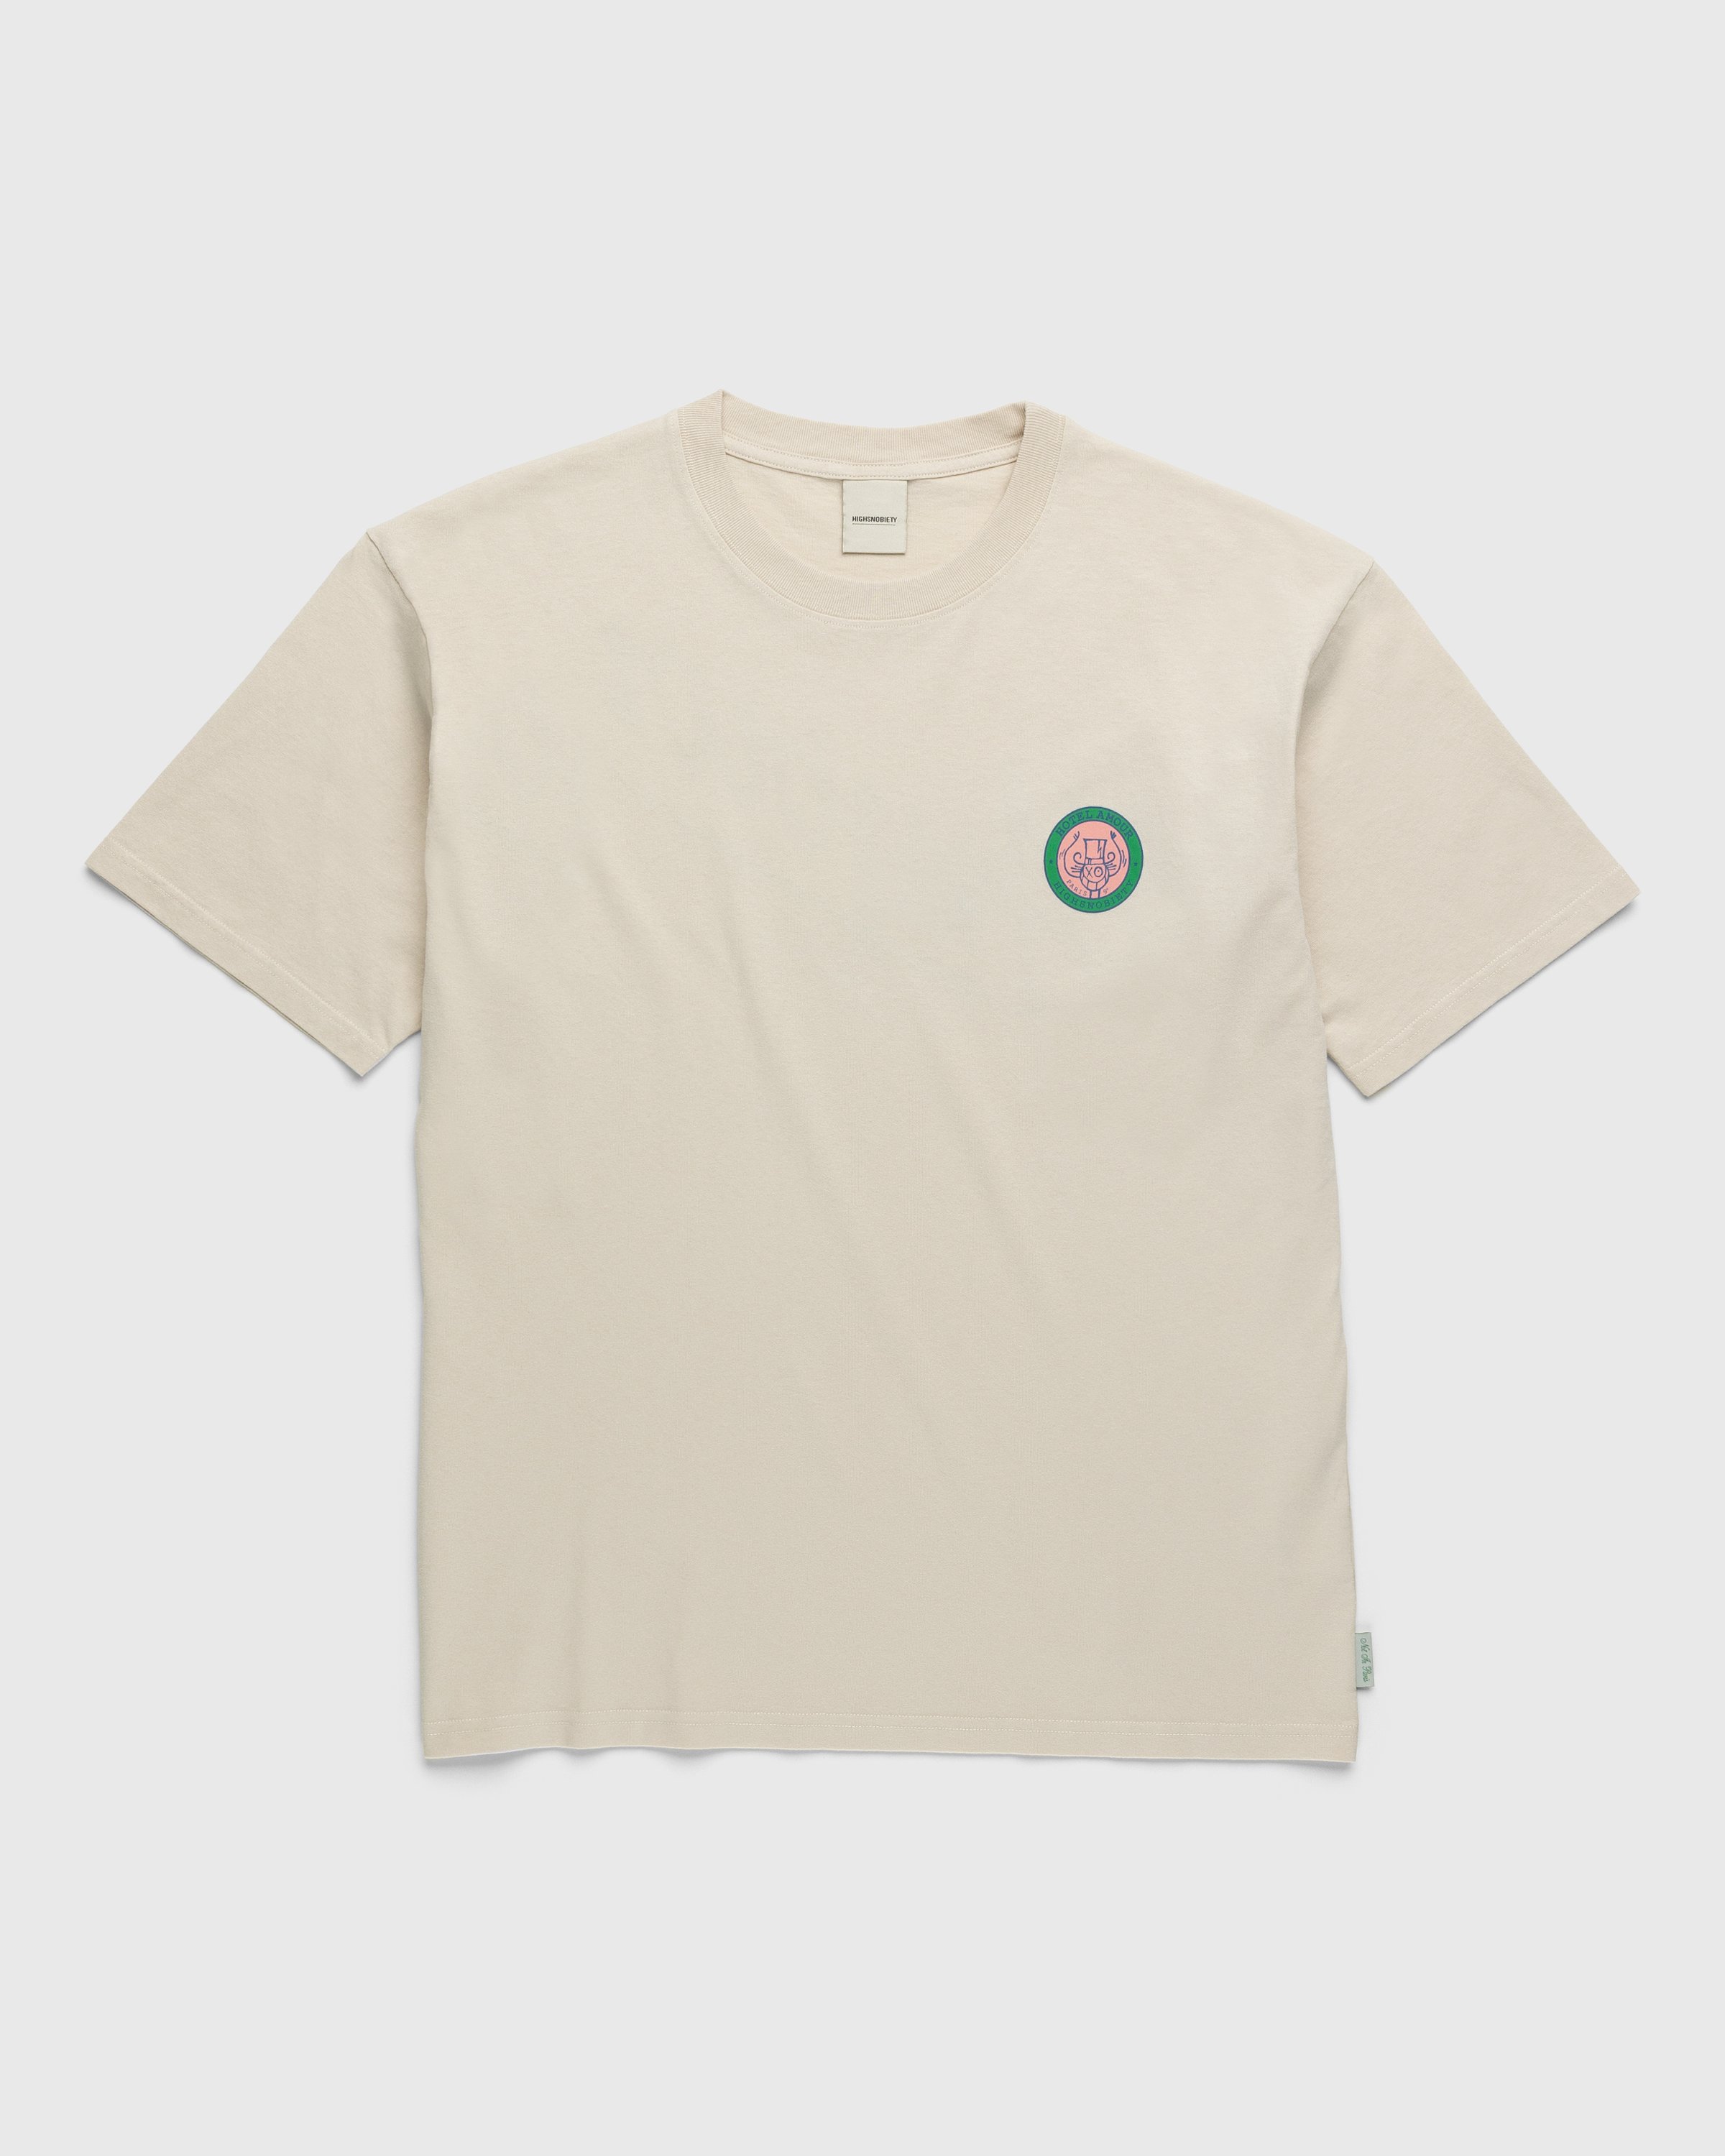 Hotel Amour x Highsnobiety - Not In Paris 4 T-Shirt Eggshell - Clothing - Beige - Image 2